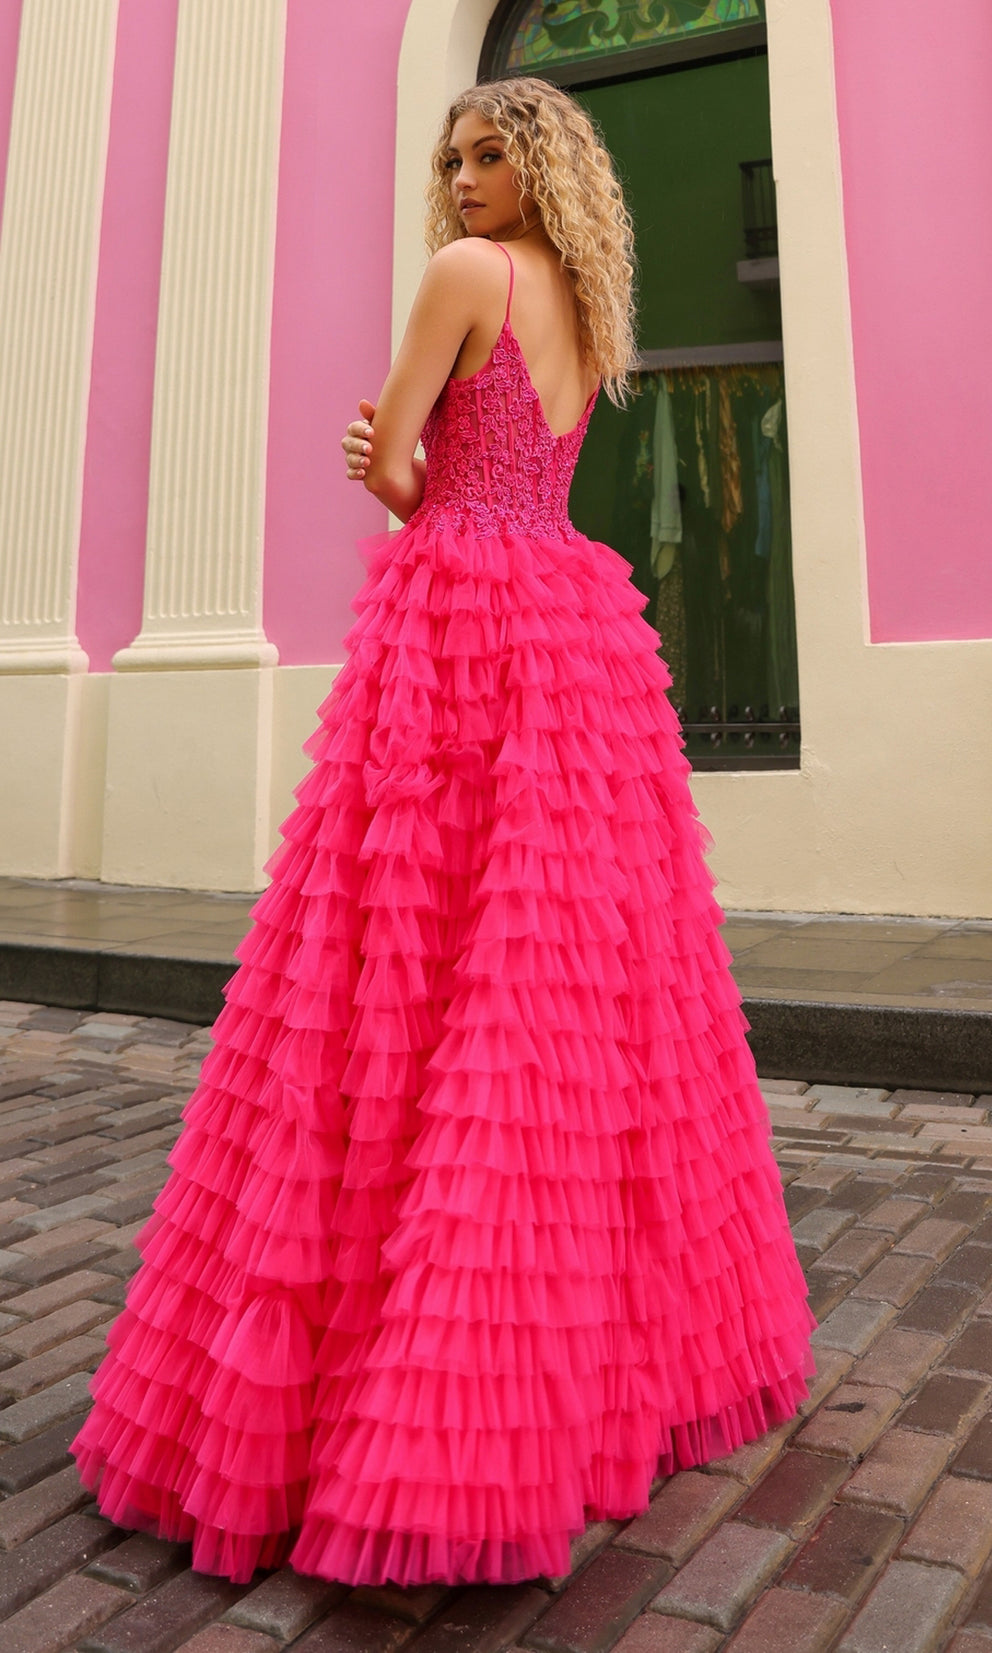 DANAE Hot Pink Tiered Ruffled Slit Ball Gown School Formal & Prom Dress